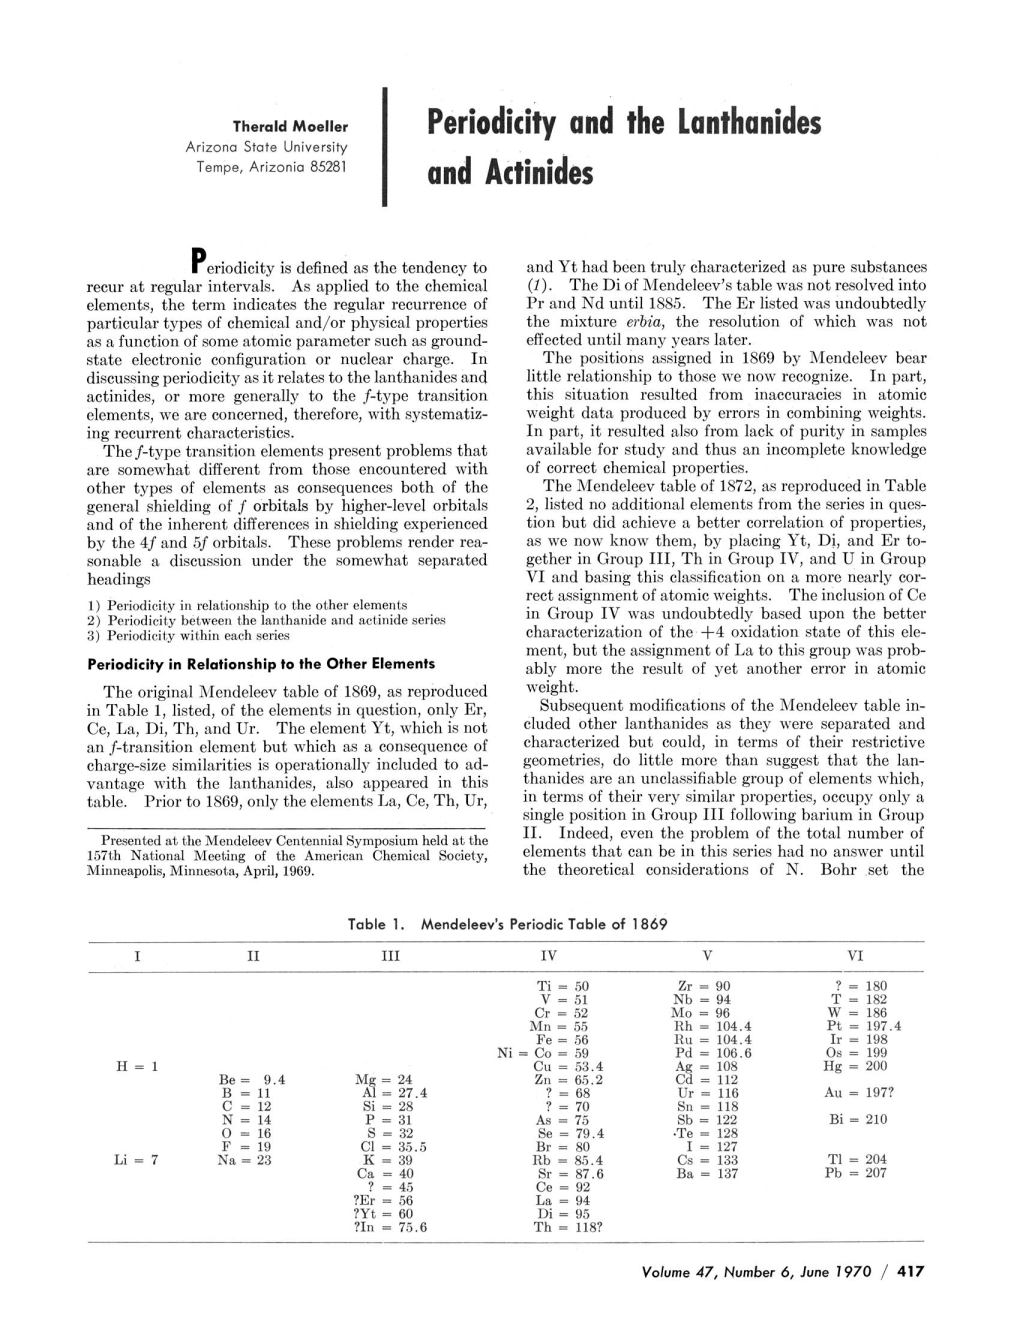 Periodicity and the Lanthanides and Actinides